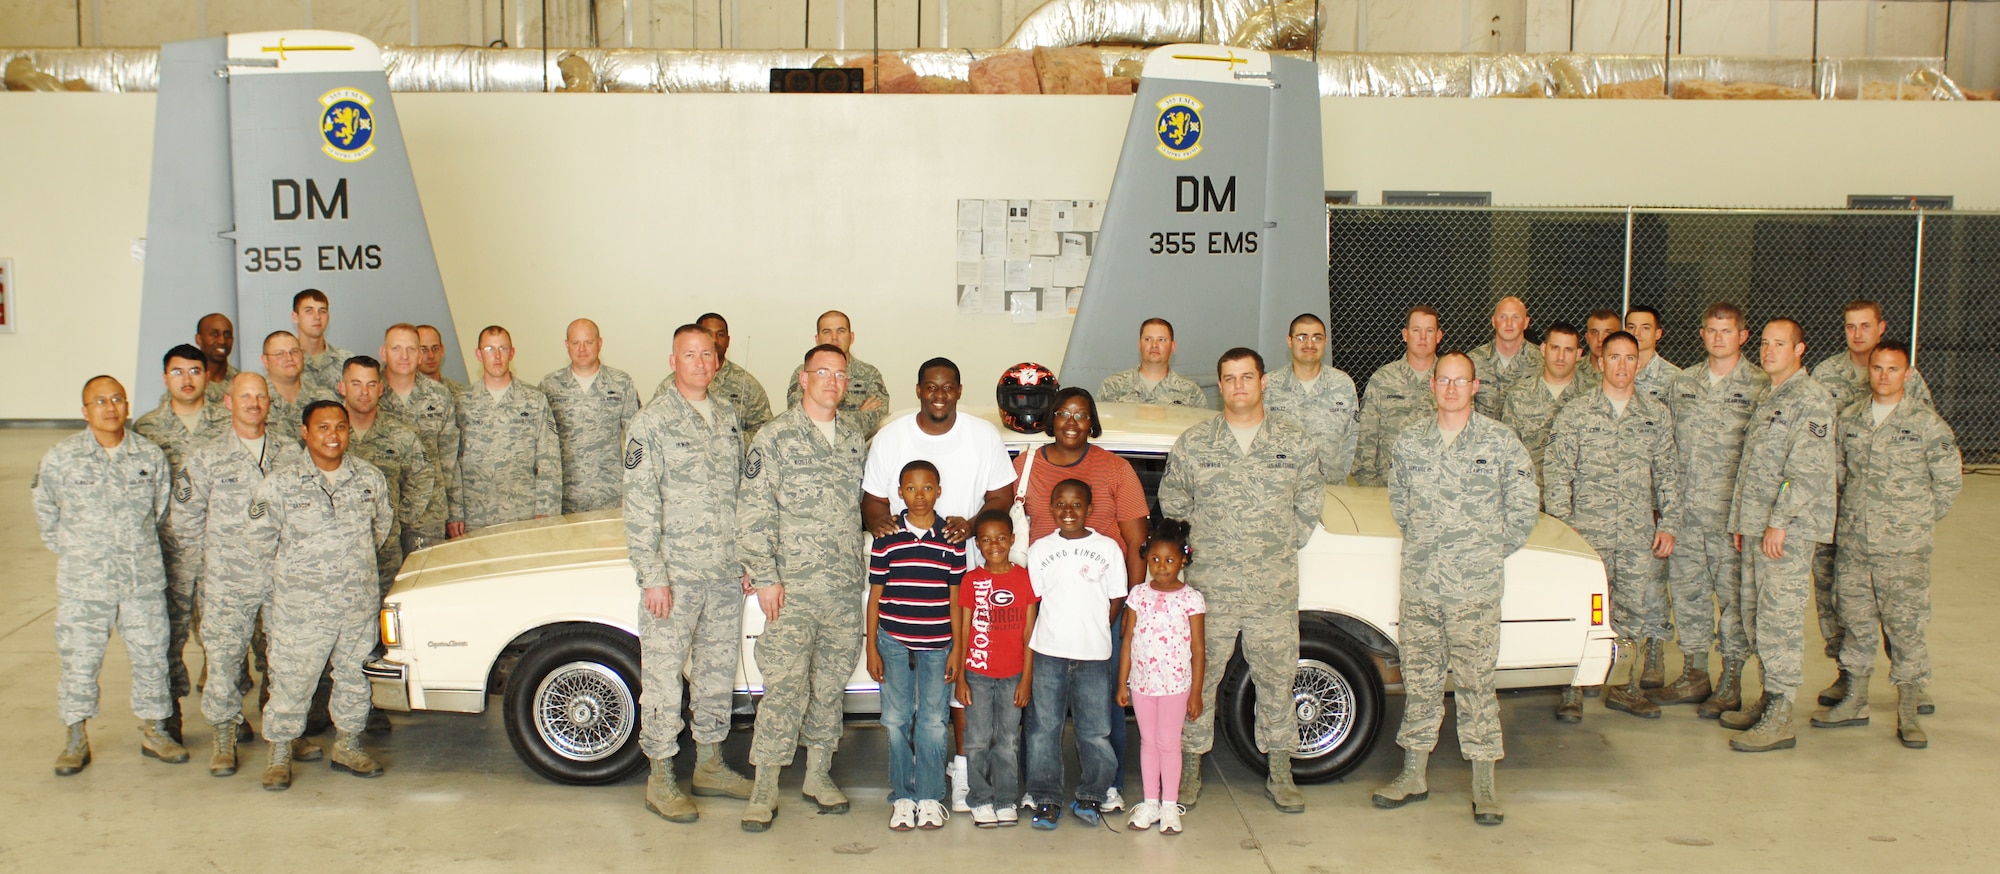 U.S. Air Force Tech. Sgt. Adrian Mapps, 355th Equipment Maintenance Squadron, along with his family and other members of the 355th EMS, stand around Mapps’ restored 1984 Chevy Caprice Classic in a hangar on Davis-Monthan Air Force Base, Ariz., March 5. The car was presented to Mapps by members of his squadron who used their own time and money to refurbish the vehicle after a motorcycle accident totaled Sergeant Mapps’ only working form of transportation. (U.S. Air Force photo by Airman 1st Class Saphfire Cook/Released)